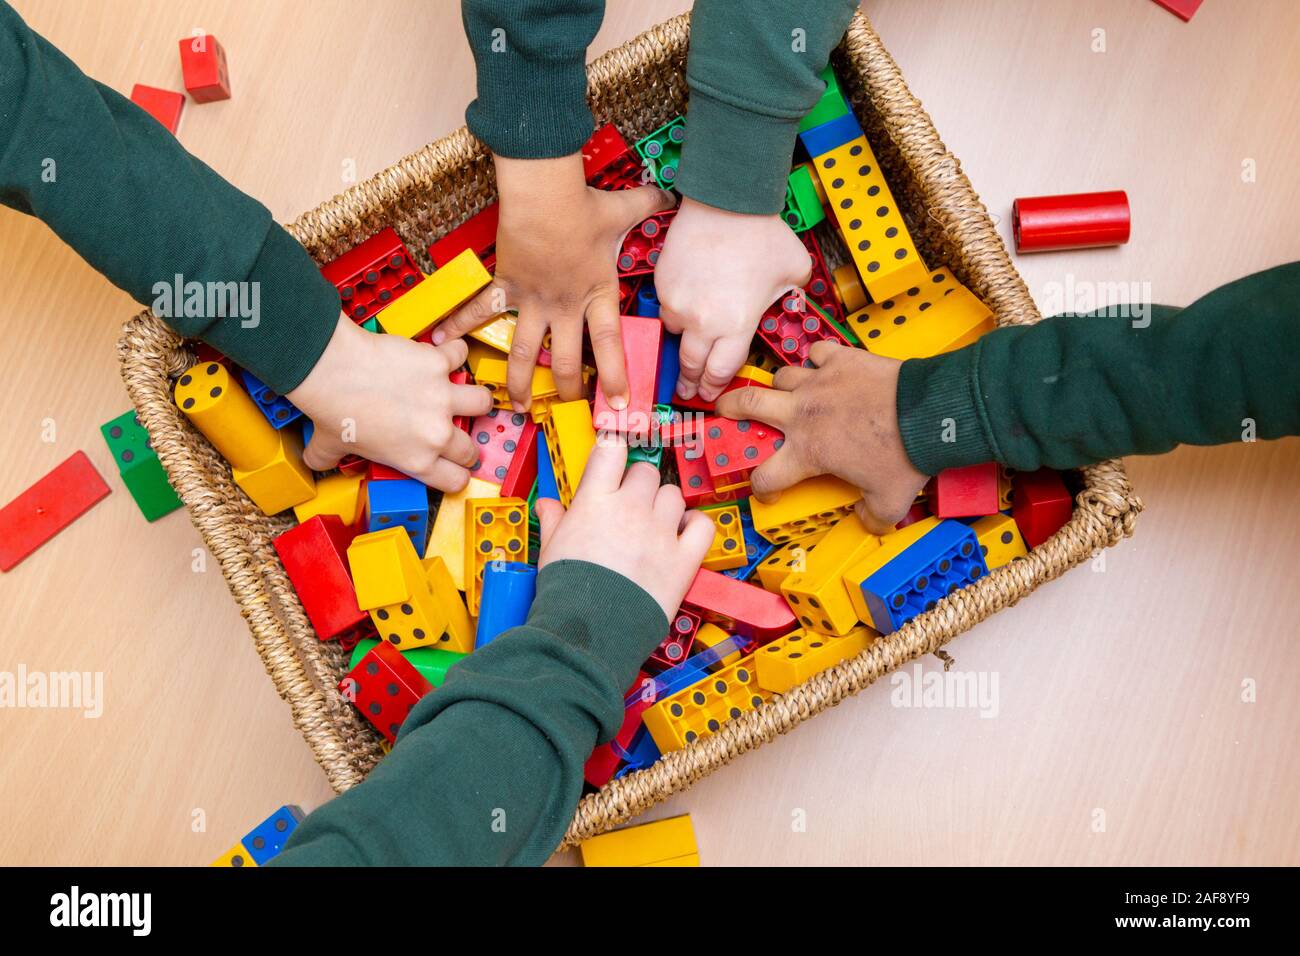 Five children's arms grabbing toy building bricks in a UK primary classroom Stock Photo